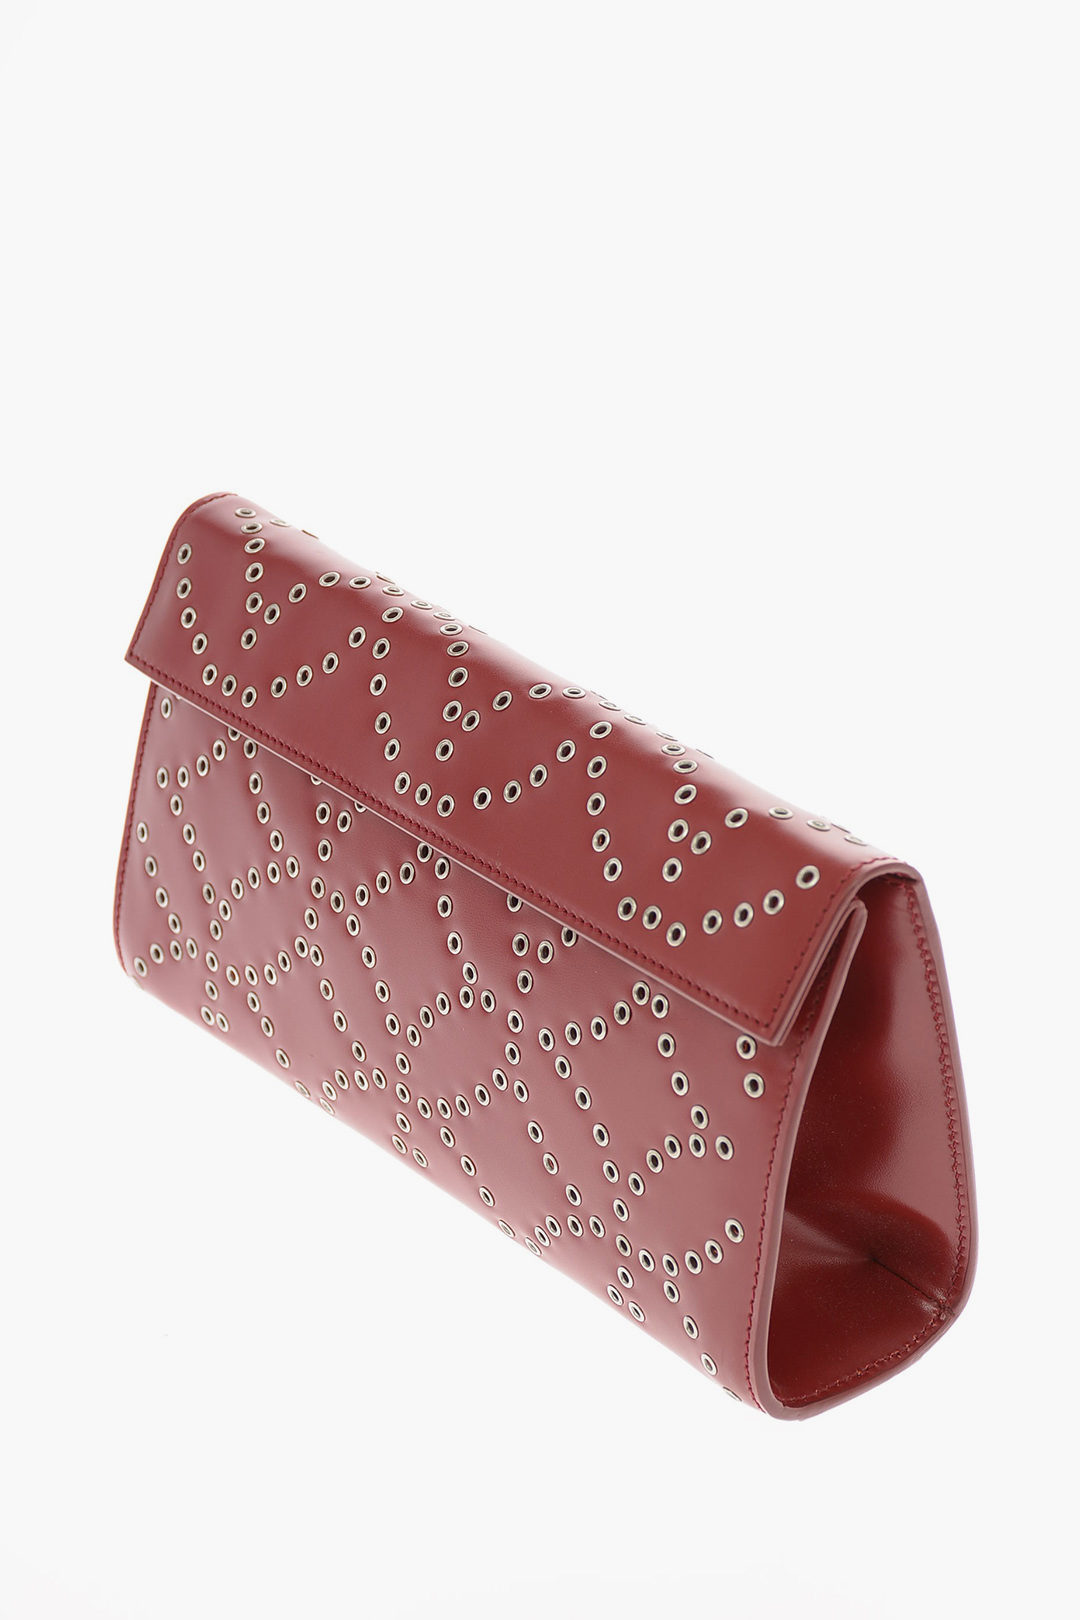 Hassy munitie Onschuld Alaia Studded Leather Clutch with Magnetic Closure women - Glamood Outlet